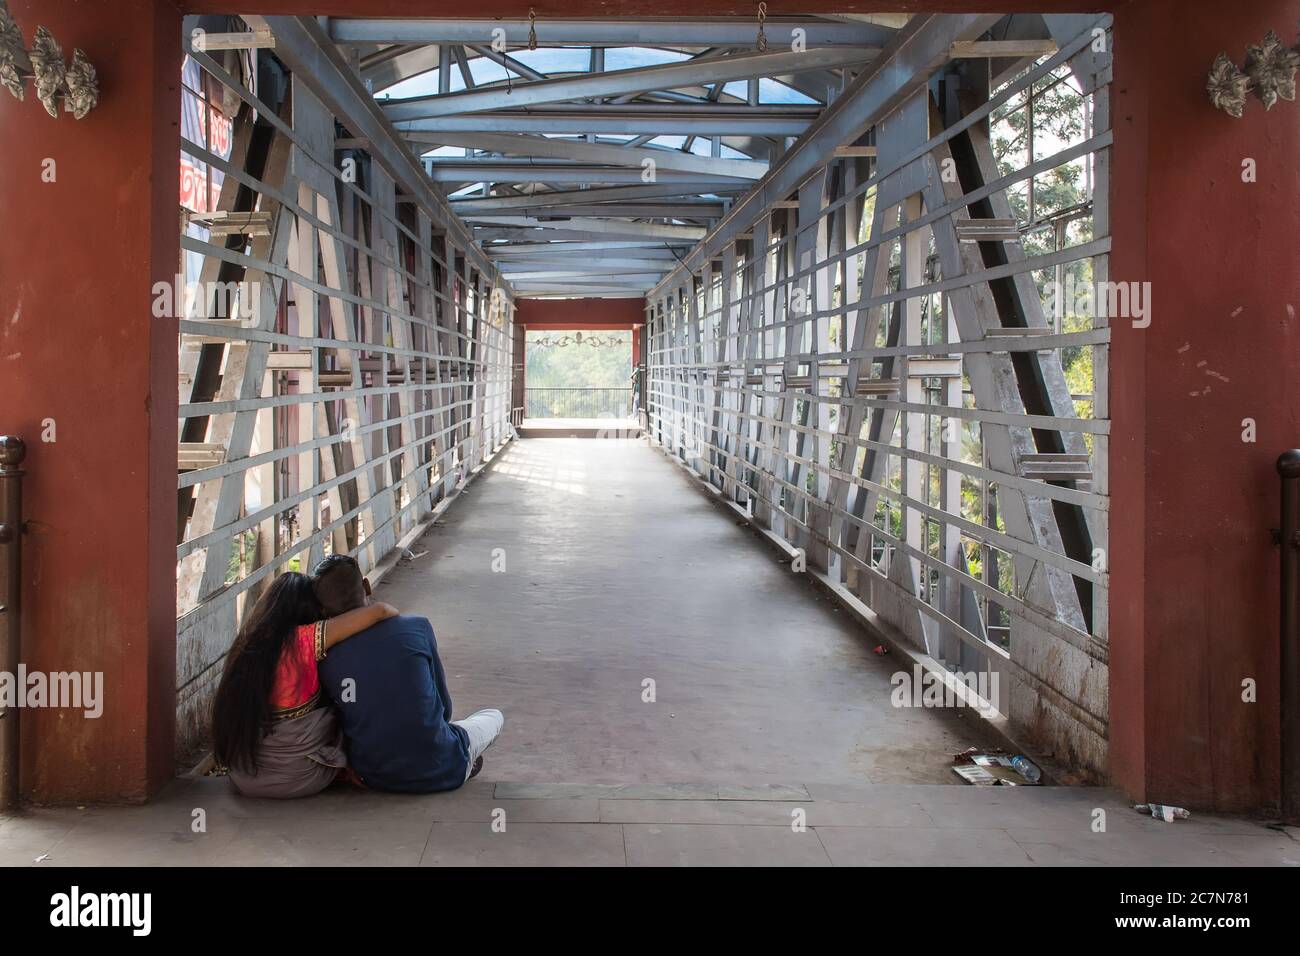 A young couple of 20-25 age enjoying a moment of silence at a walking bridge Stock Photo